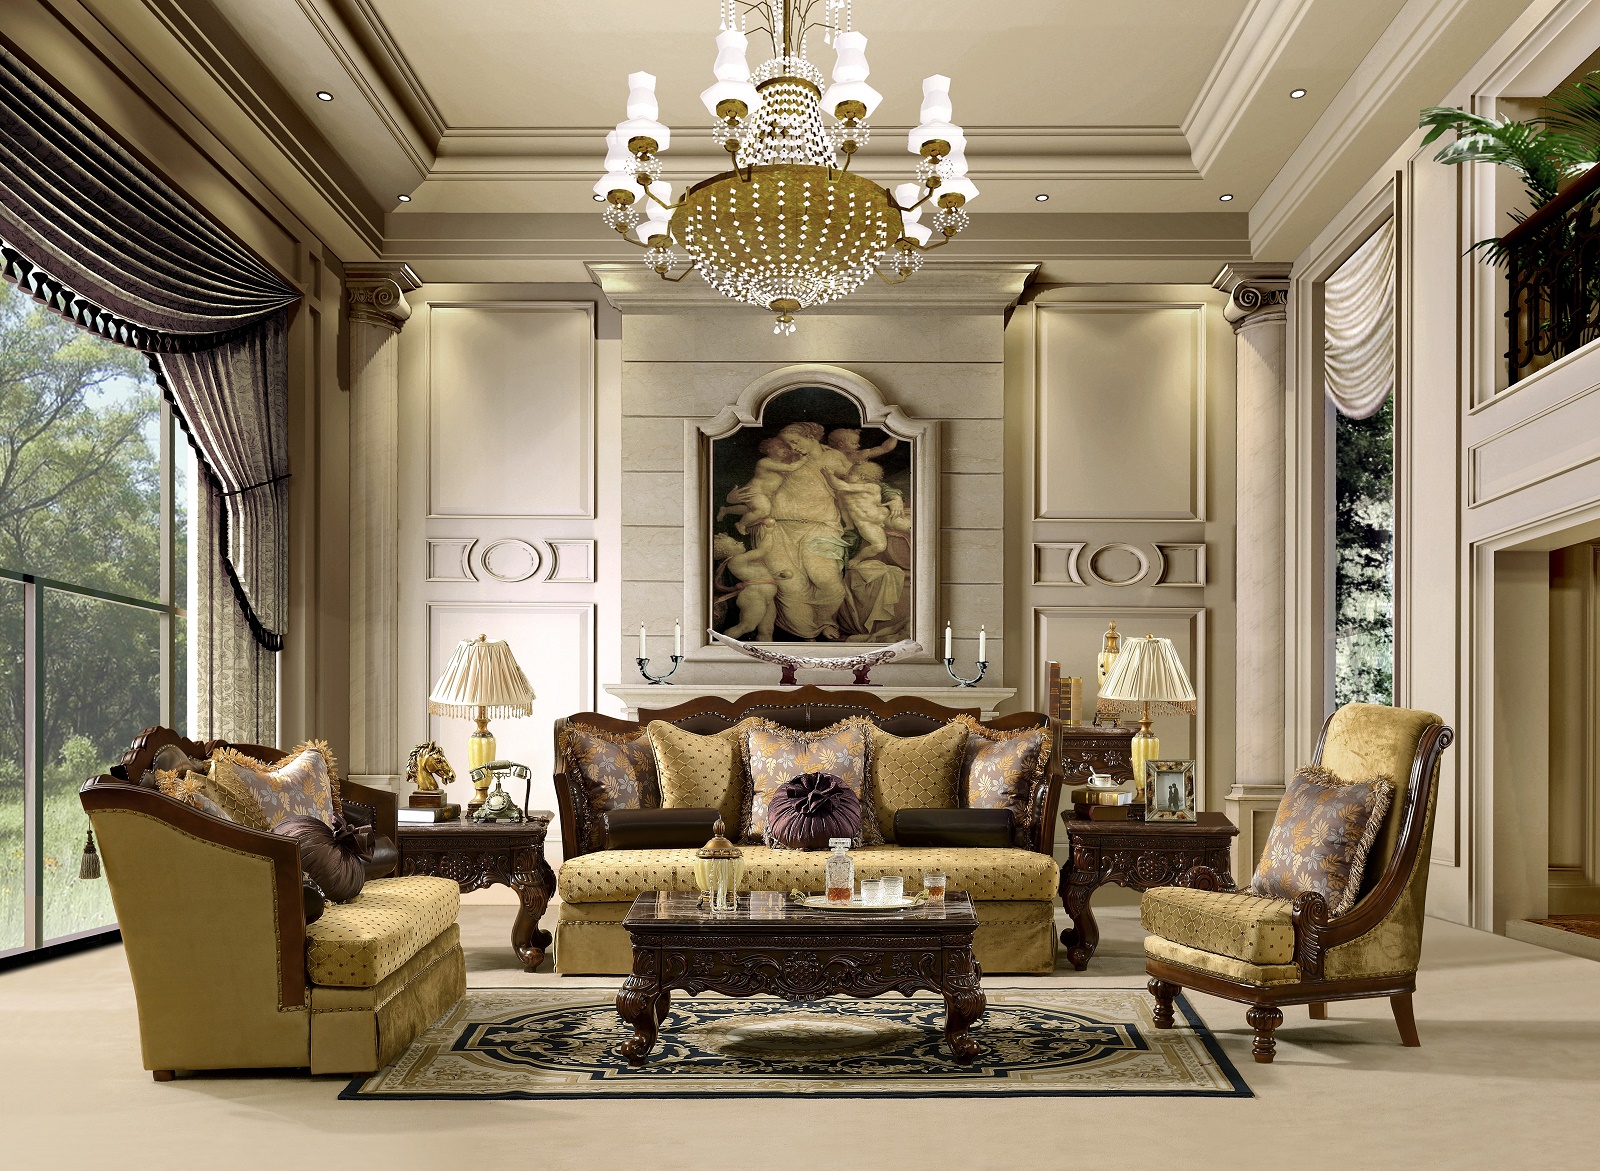 How to Select Design Of Chandelier With Antique Or Classic Style